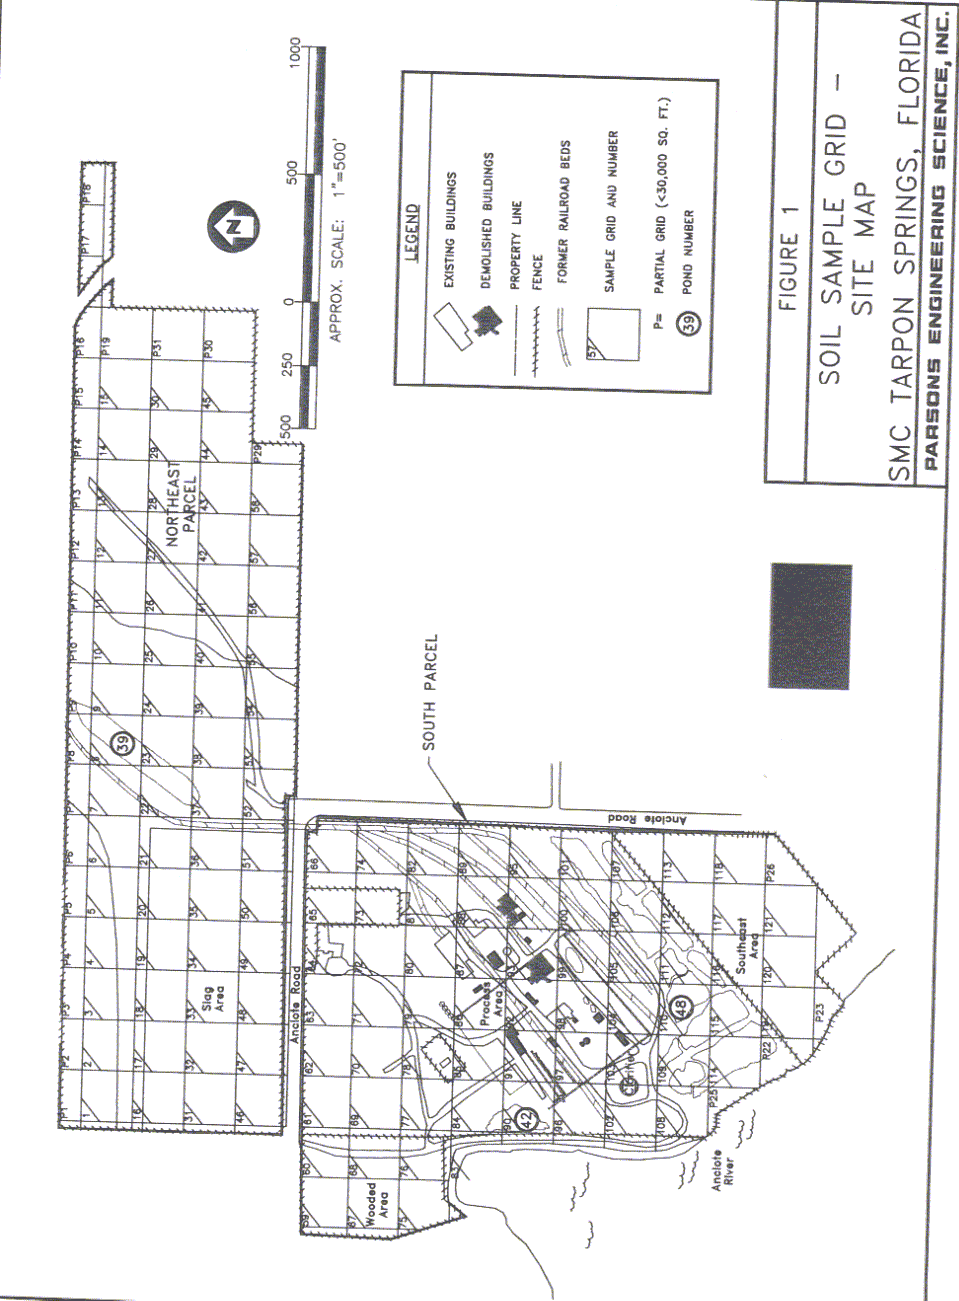 Soil Sample Grid Site Map of Stauffer Chemical Company